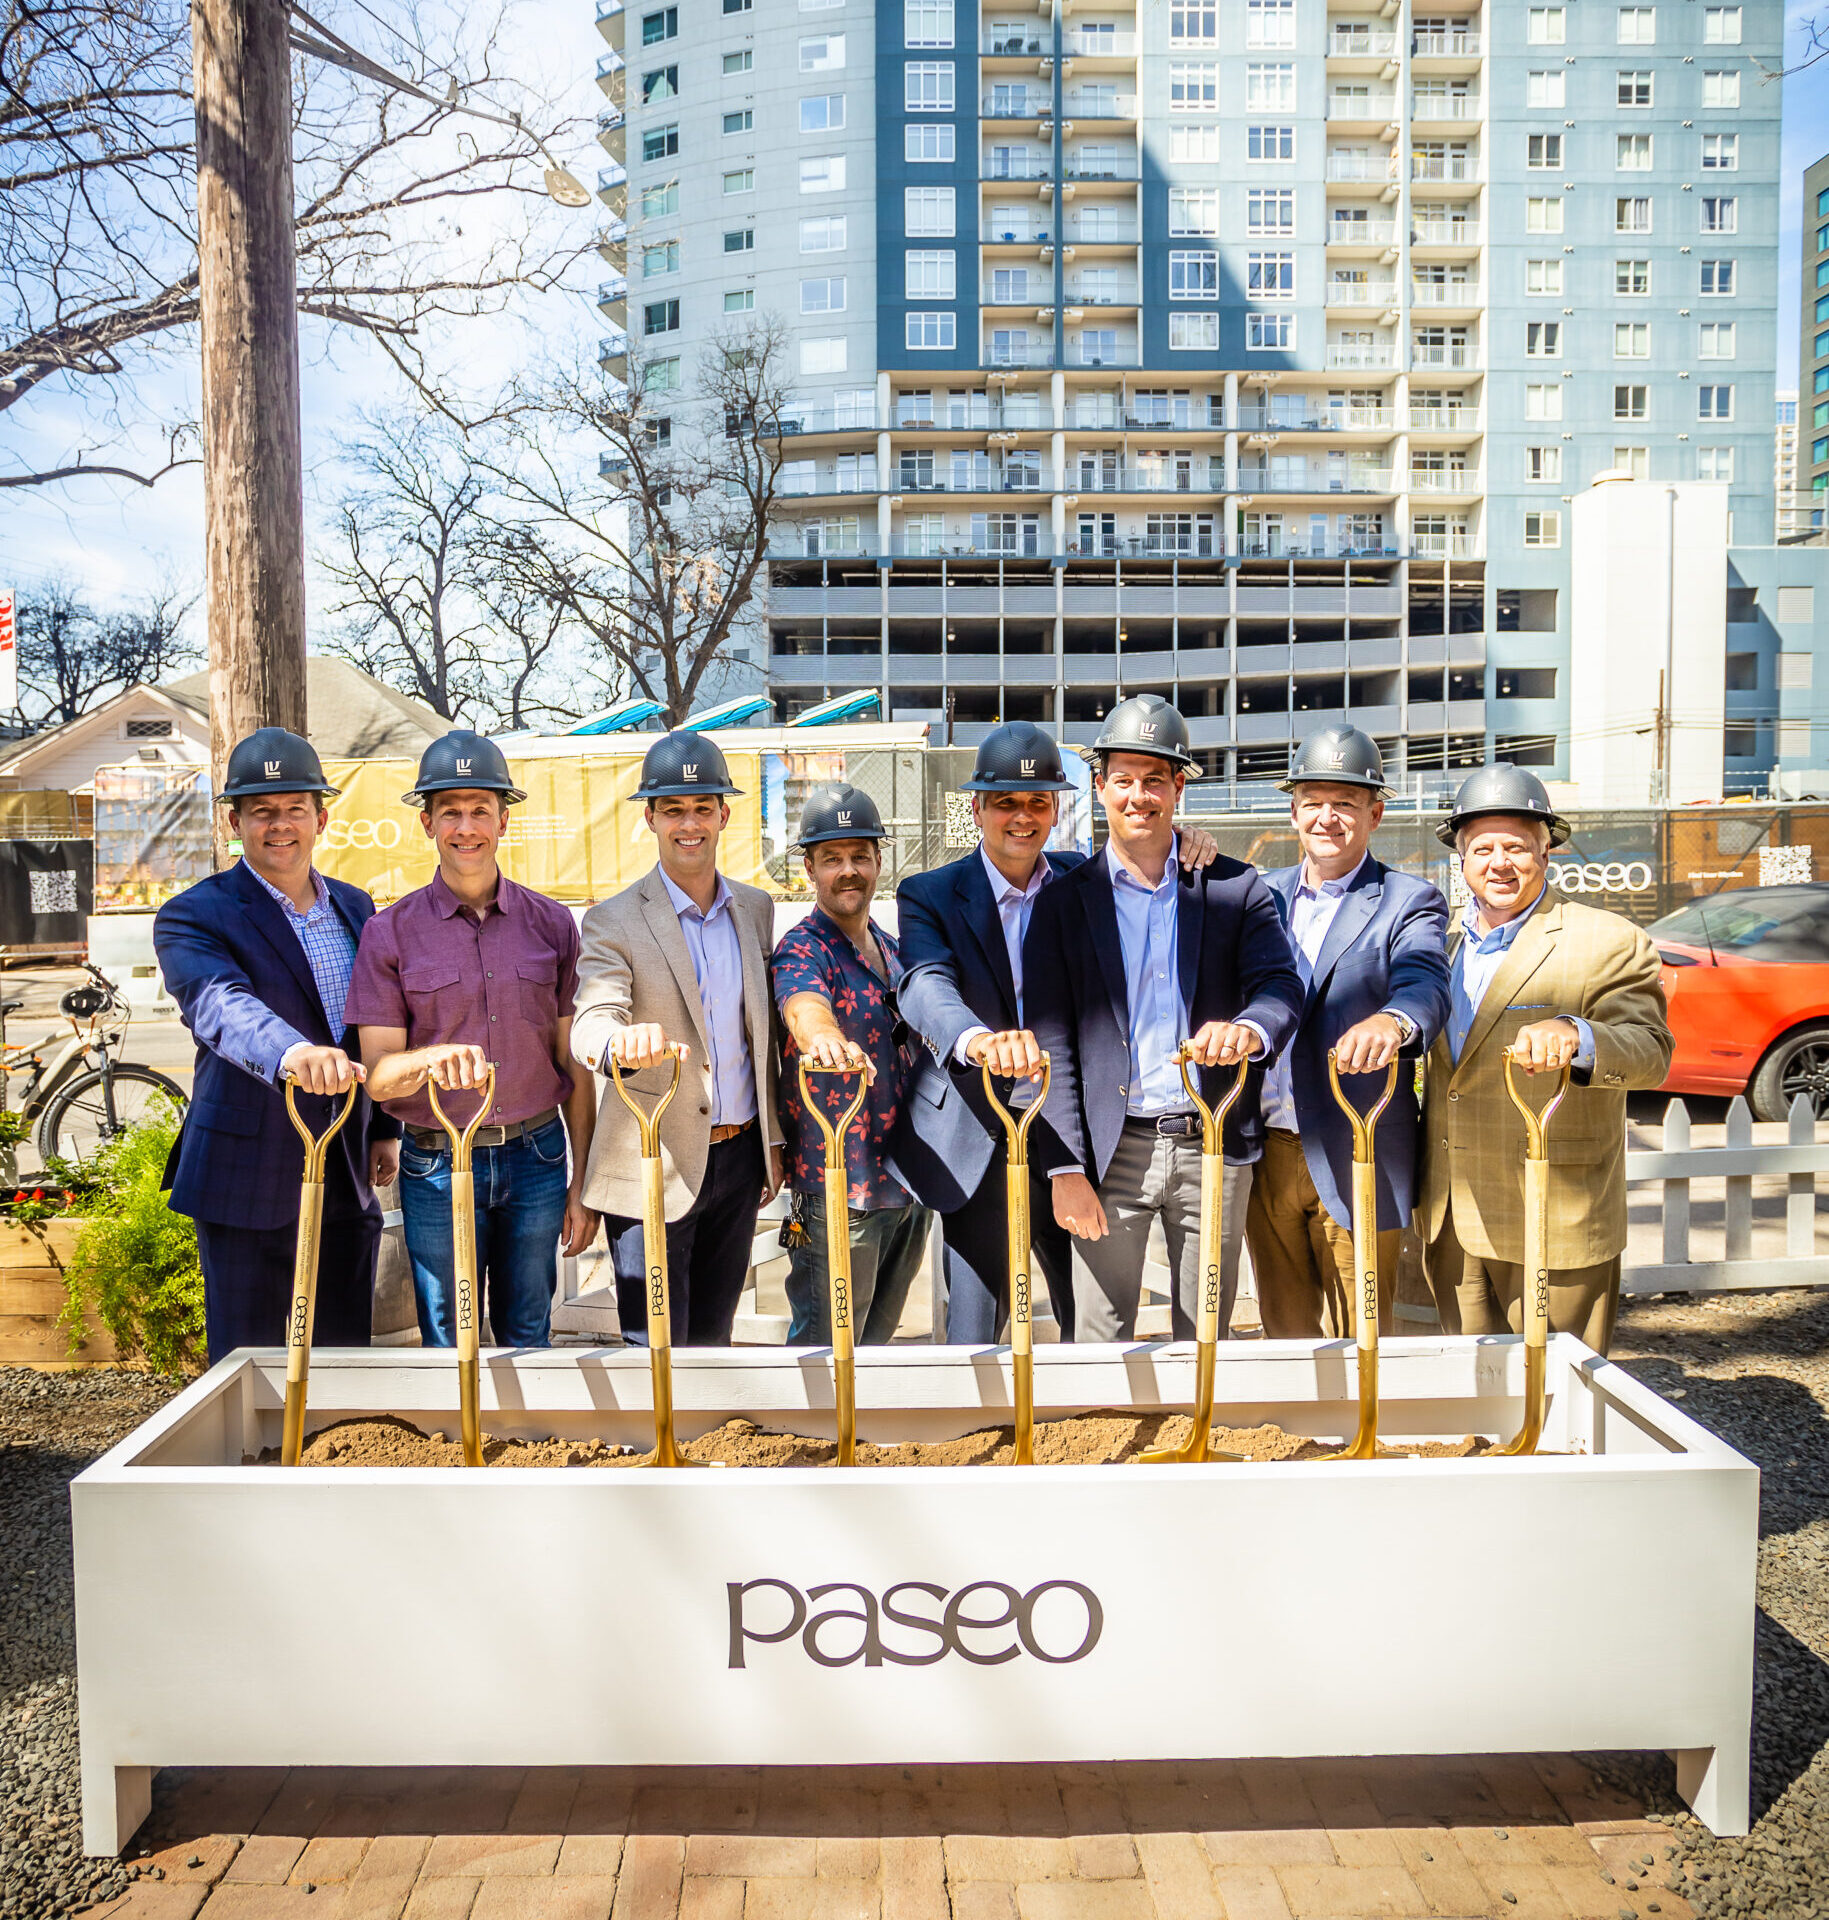 Project partners celebrate Paseo at 80 Rainey